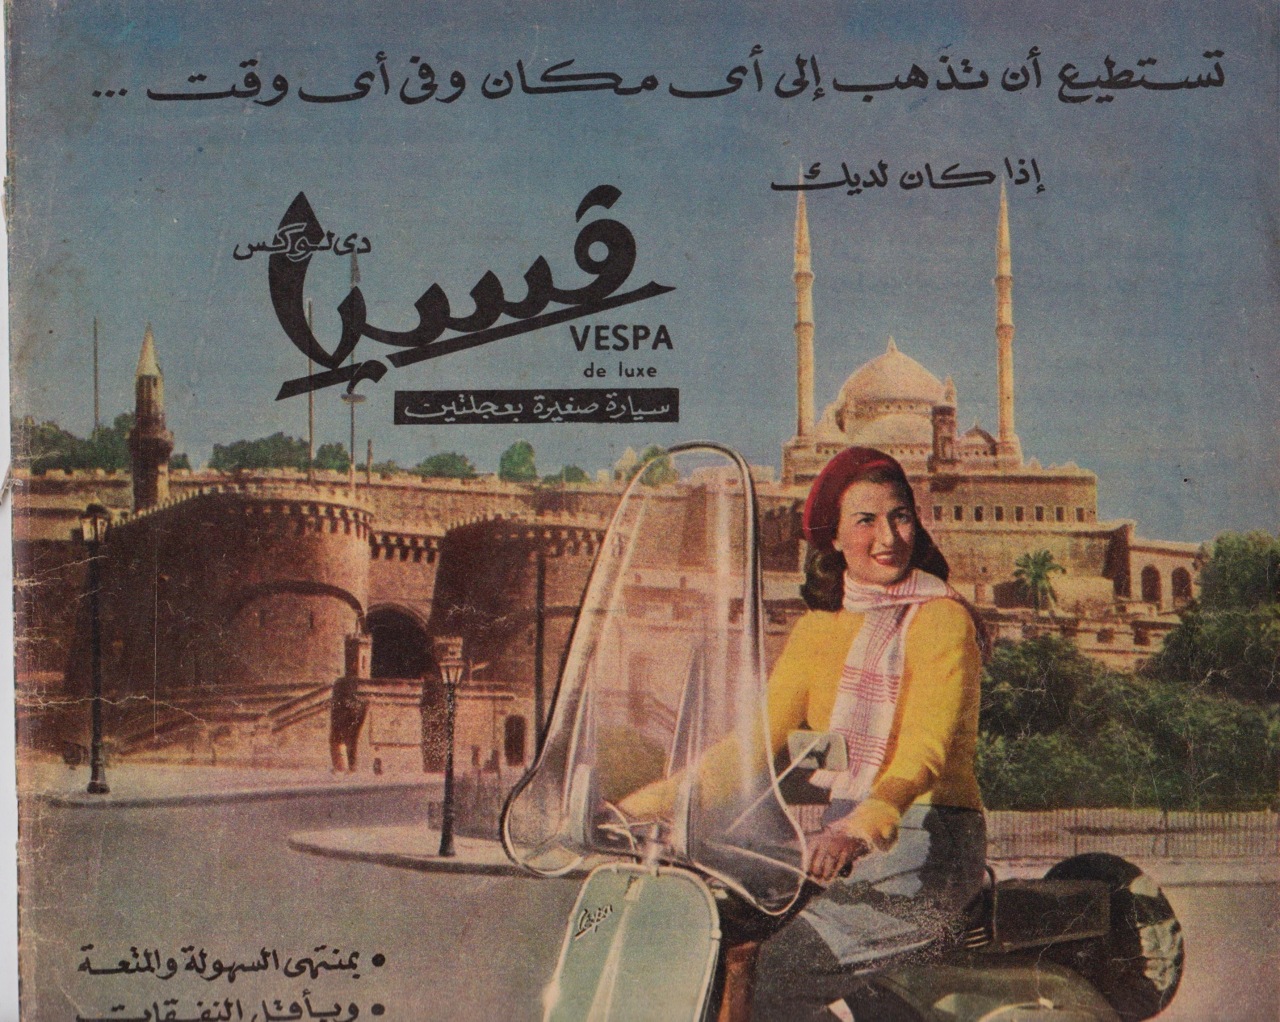 A Vespa advertisement from 1950 showing the Cairo Citadel.